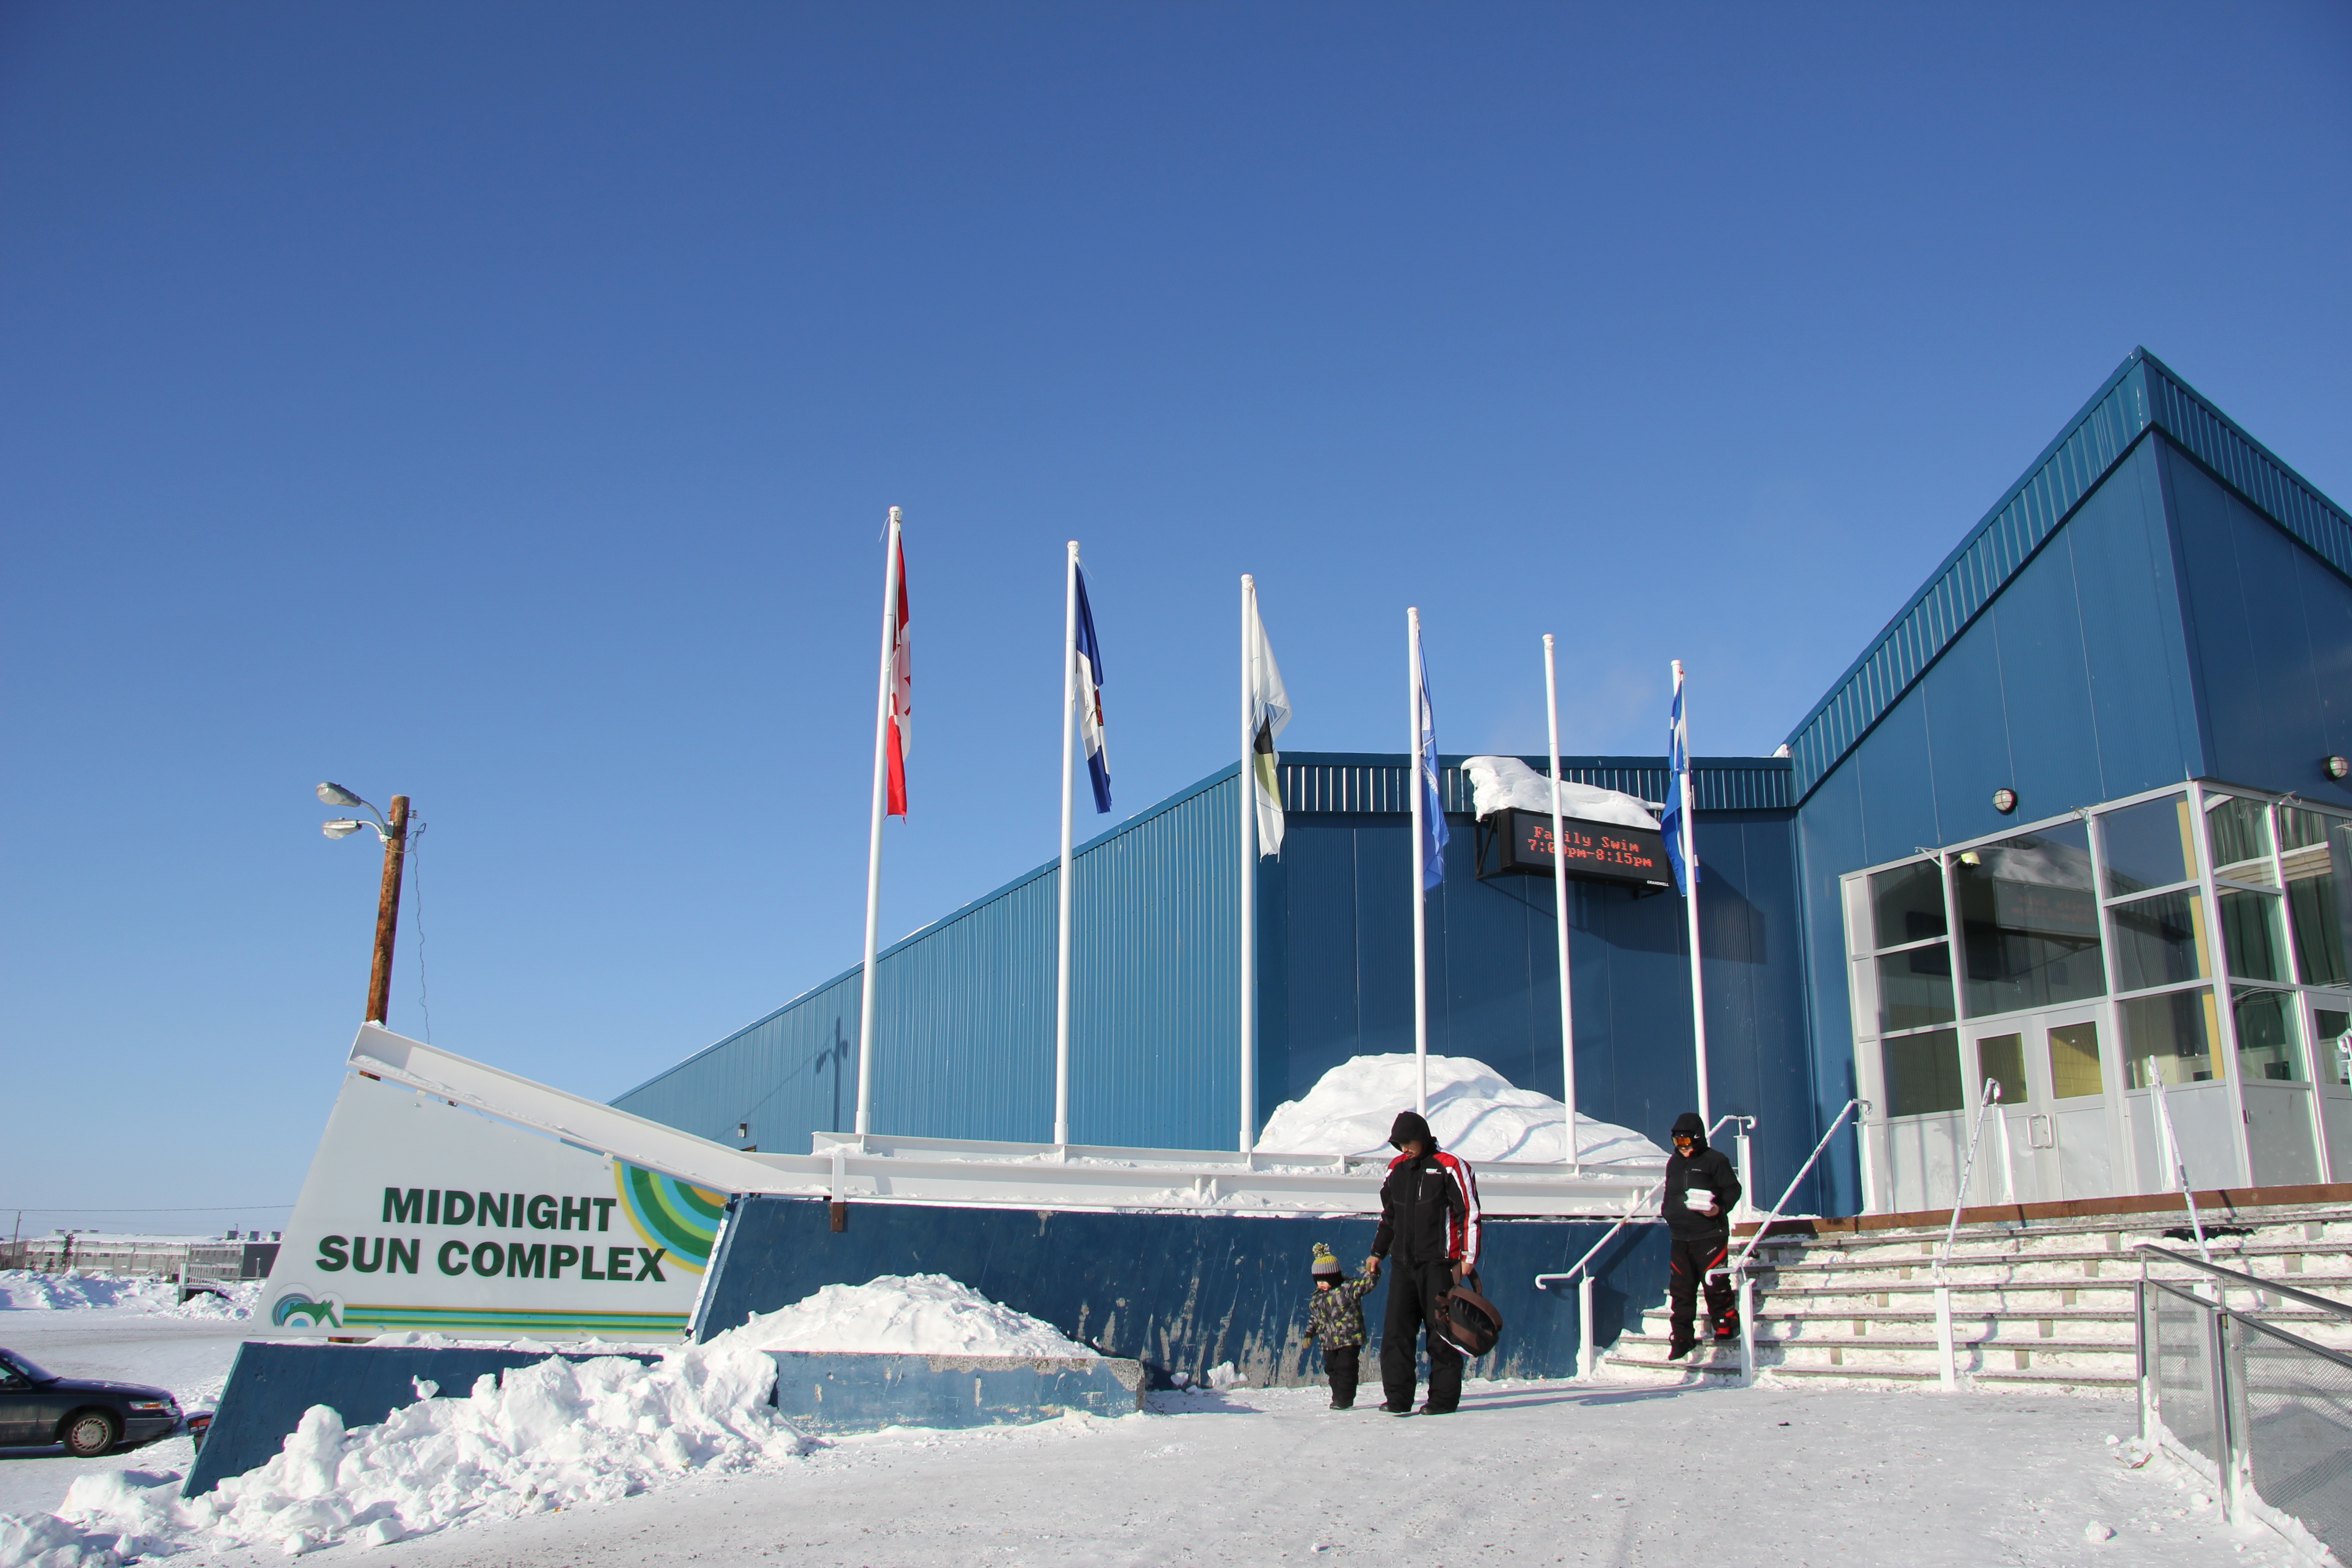 Inuvik's Midnight Sun Complex in Canada's Northwest Territories. CBC's Cross Country Checkup call-in show visited Inuvik earlier this month to ask the question: "Is Canada making the right moves in developing the north?" (Eilís Quinn, Eye on the Arctic)